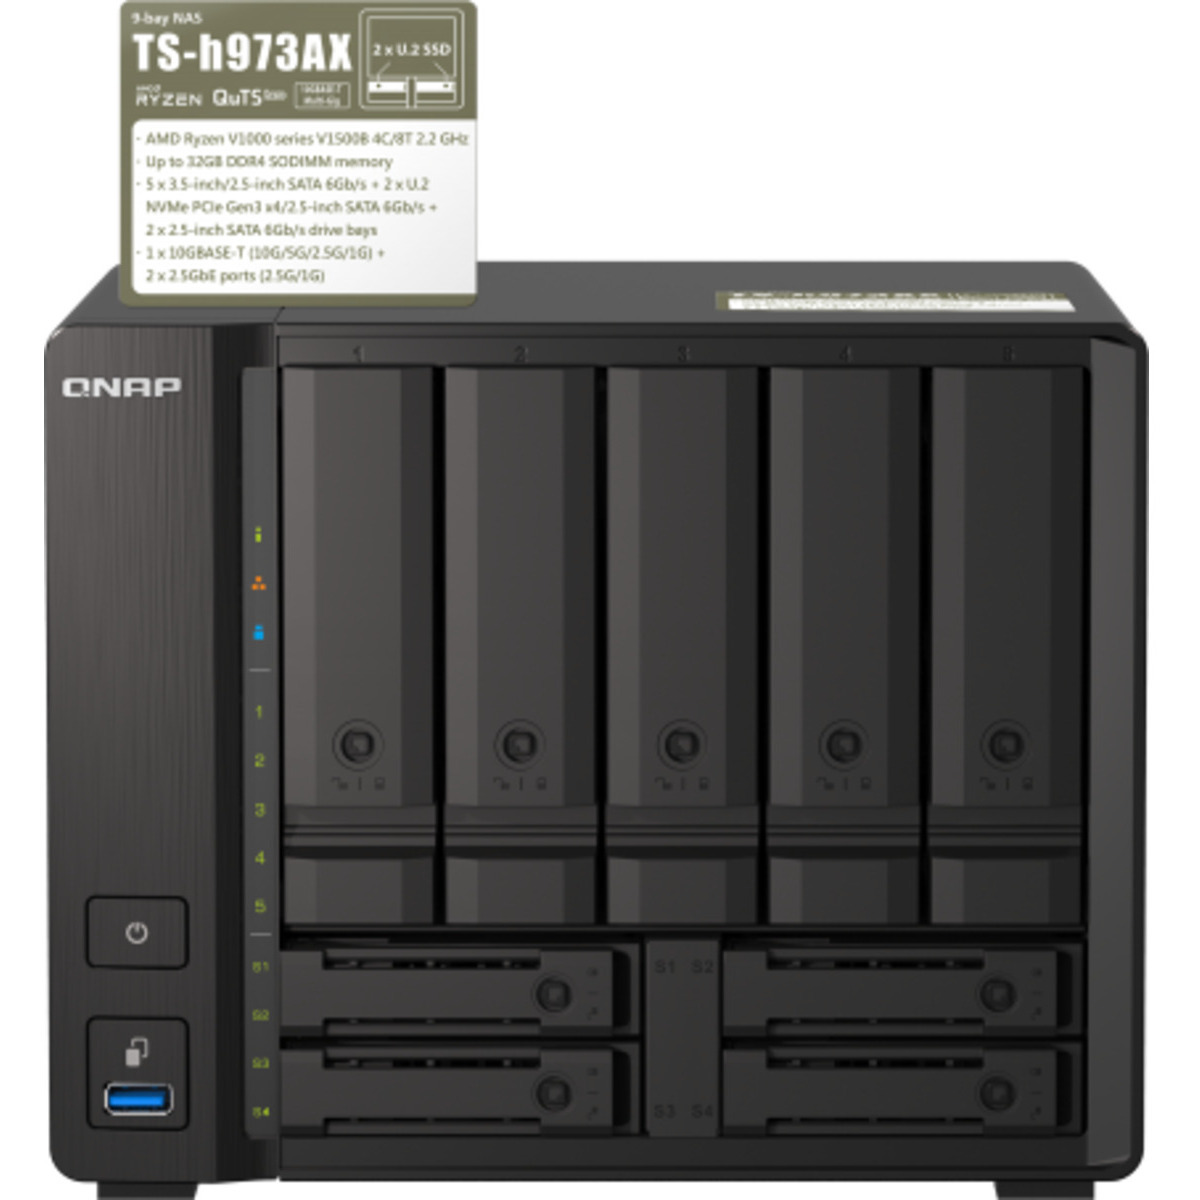 QNAP TS-h973AX  24tb 5+4-Bay Desktop Multimedia / Power User / Business NAS - Network Attached Storage Device 3x8tb Seagate BarraCuda ST8000DM004 3.5 5400rpm SATA 6Gb/s HDD CONSUMER Class Drives Installed - Burn-In Tested TS-h973AX 